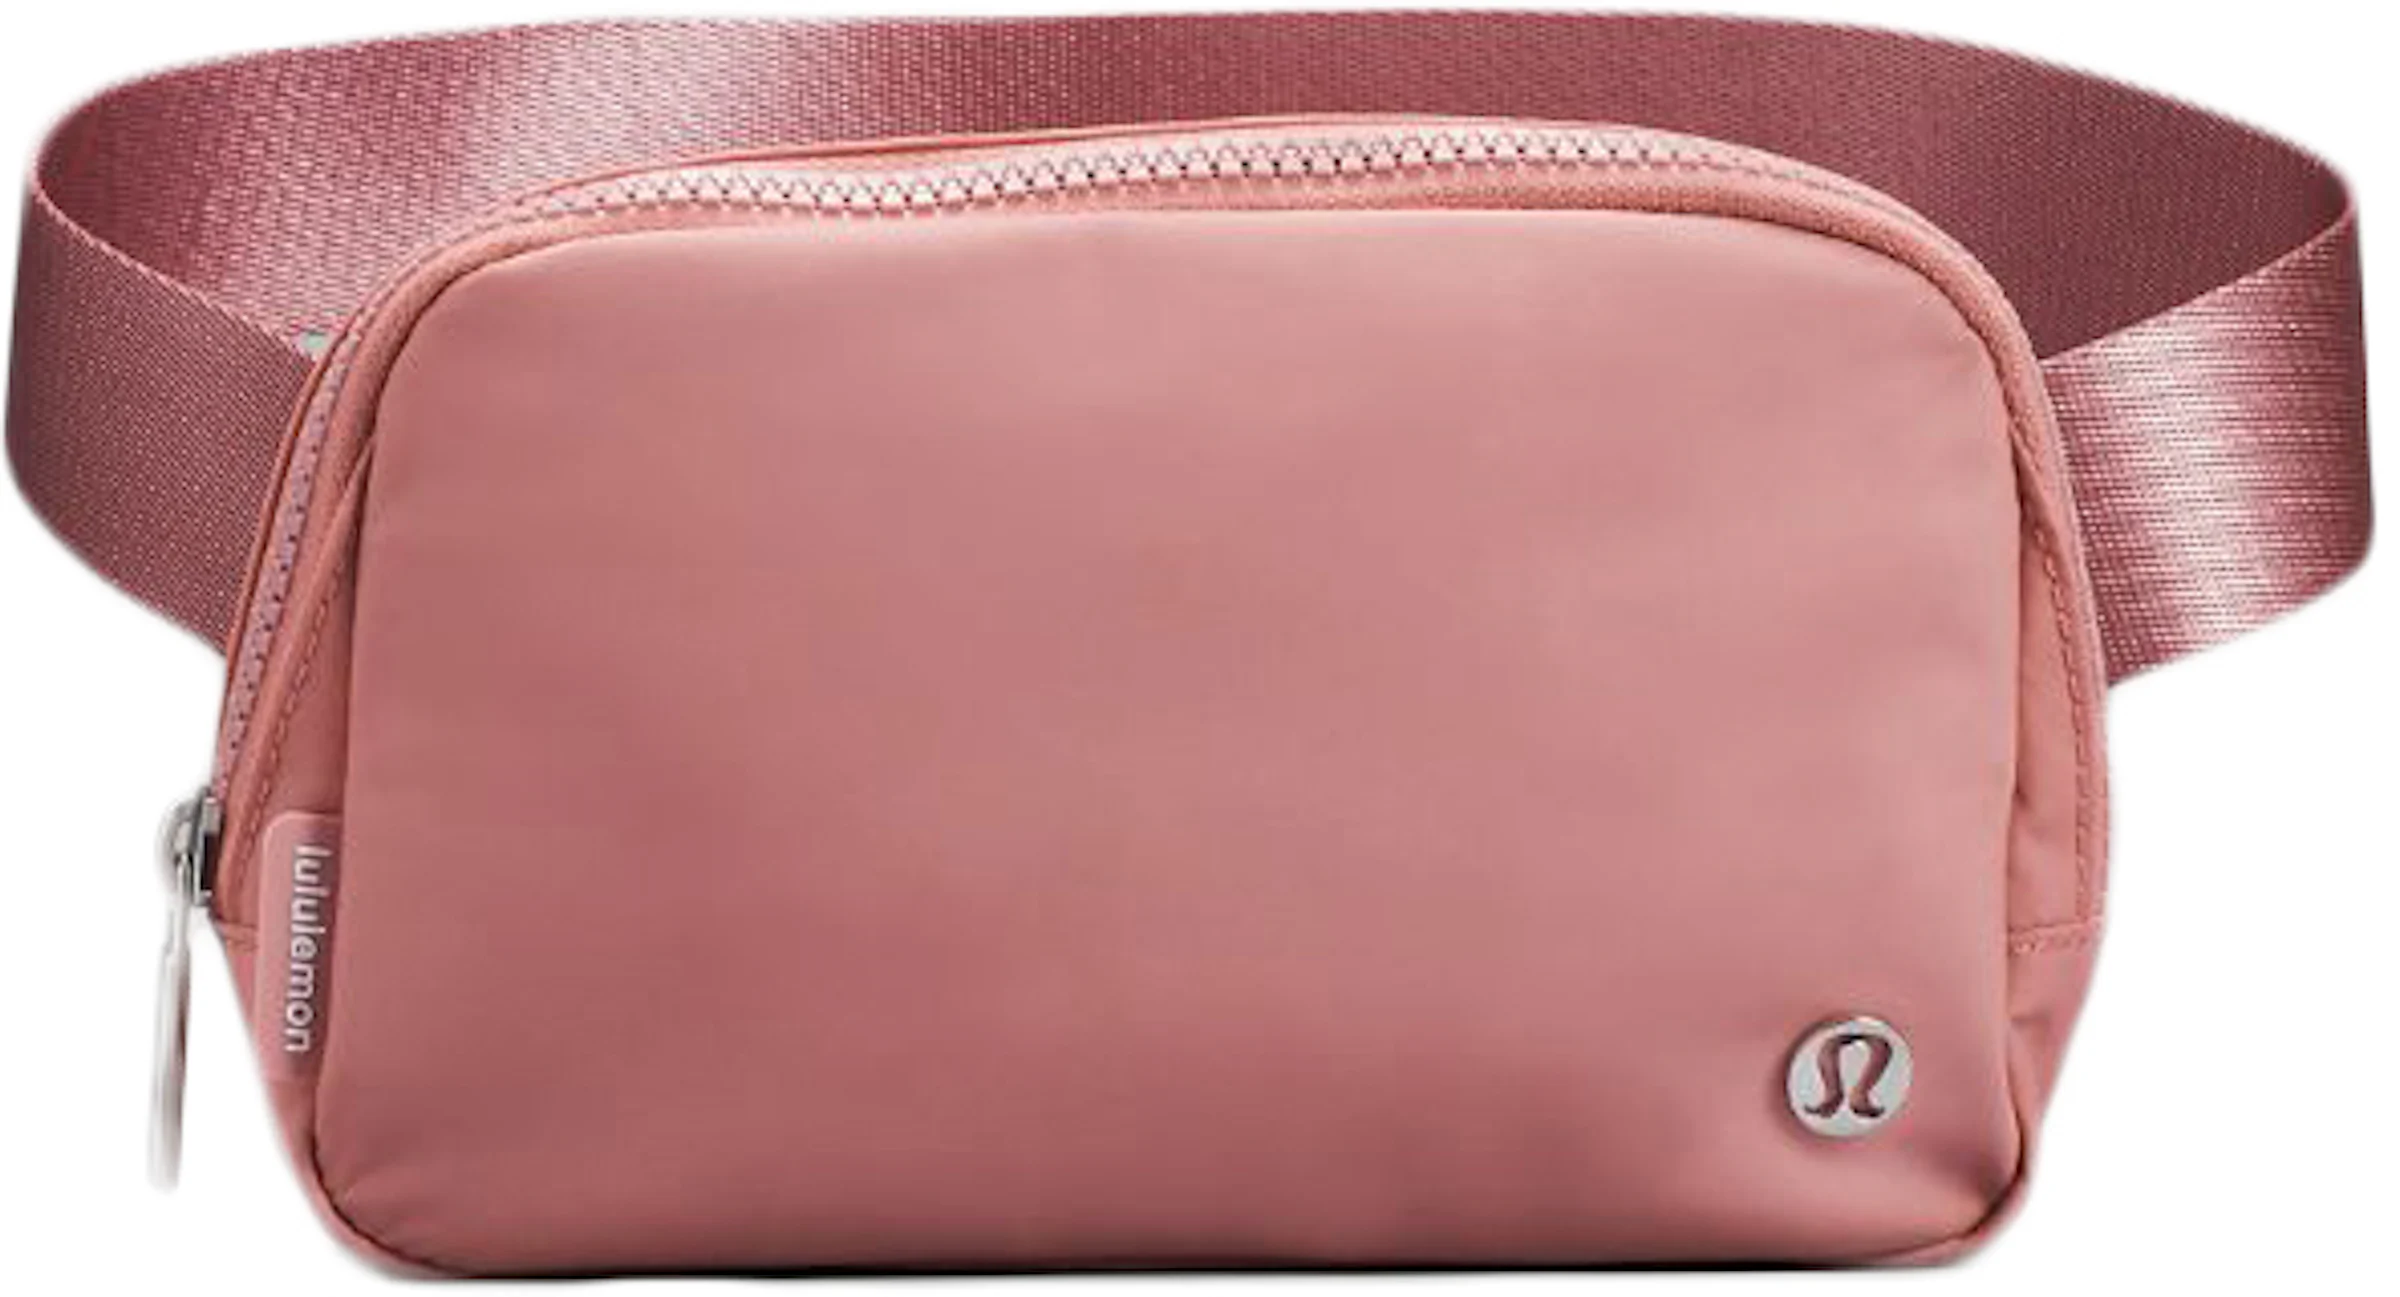 Track Everywhere Belt Bag 1L - Pink Clay/Pink Pastel - ONE SIZE at